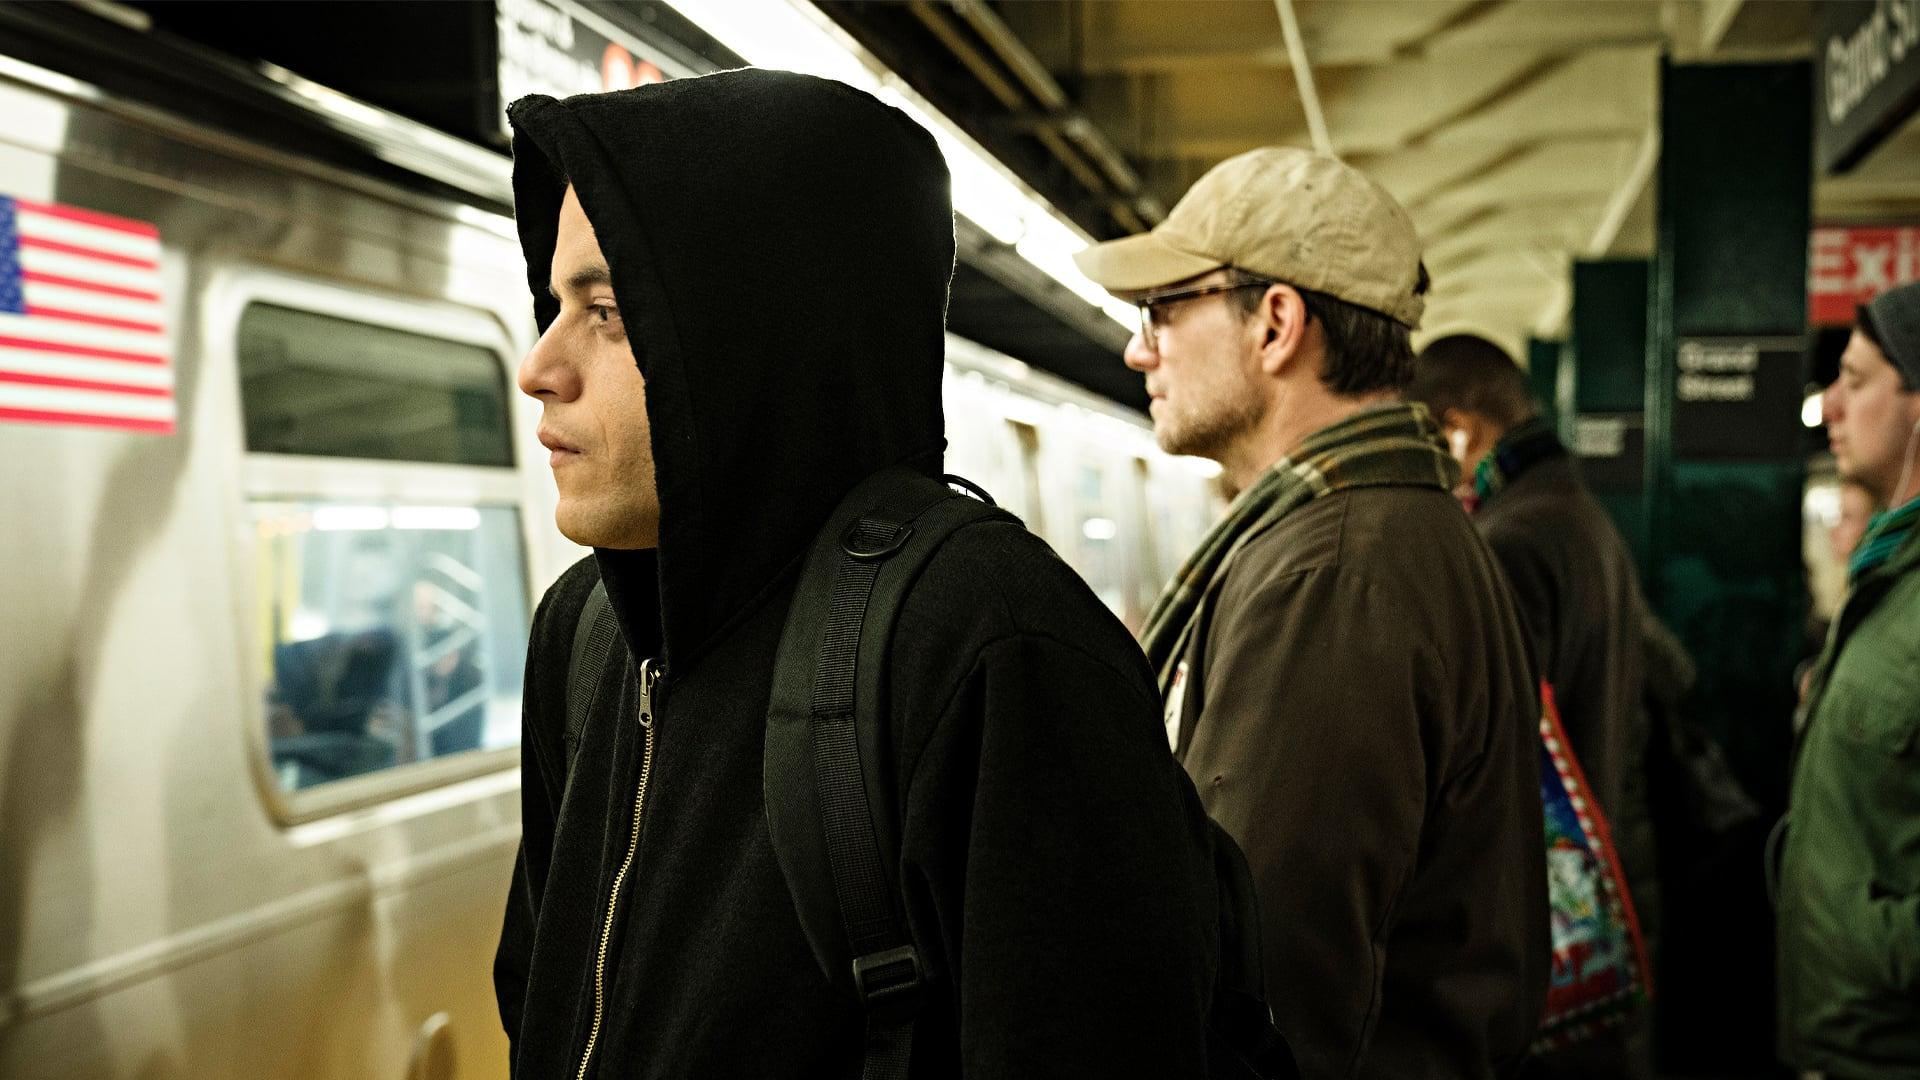 Forenkle Bloodstained Engel Mr. Robot (S04E01): 401 Unauthorized Summary - Season 4 Episode 1 Guide